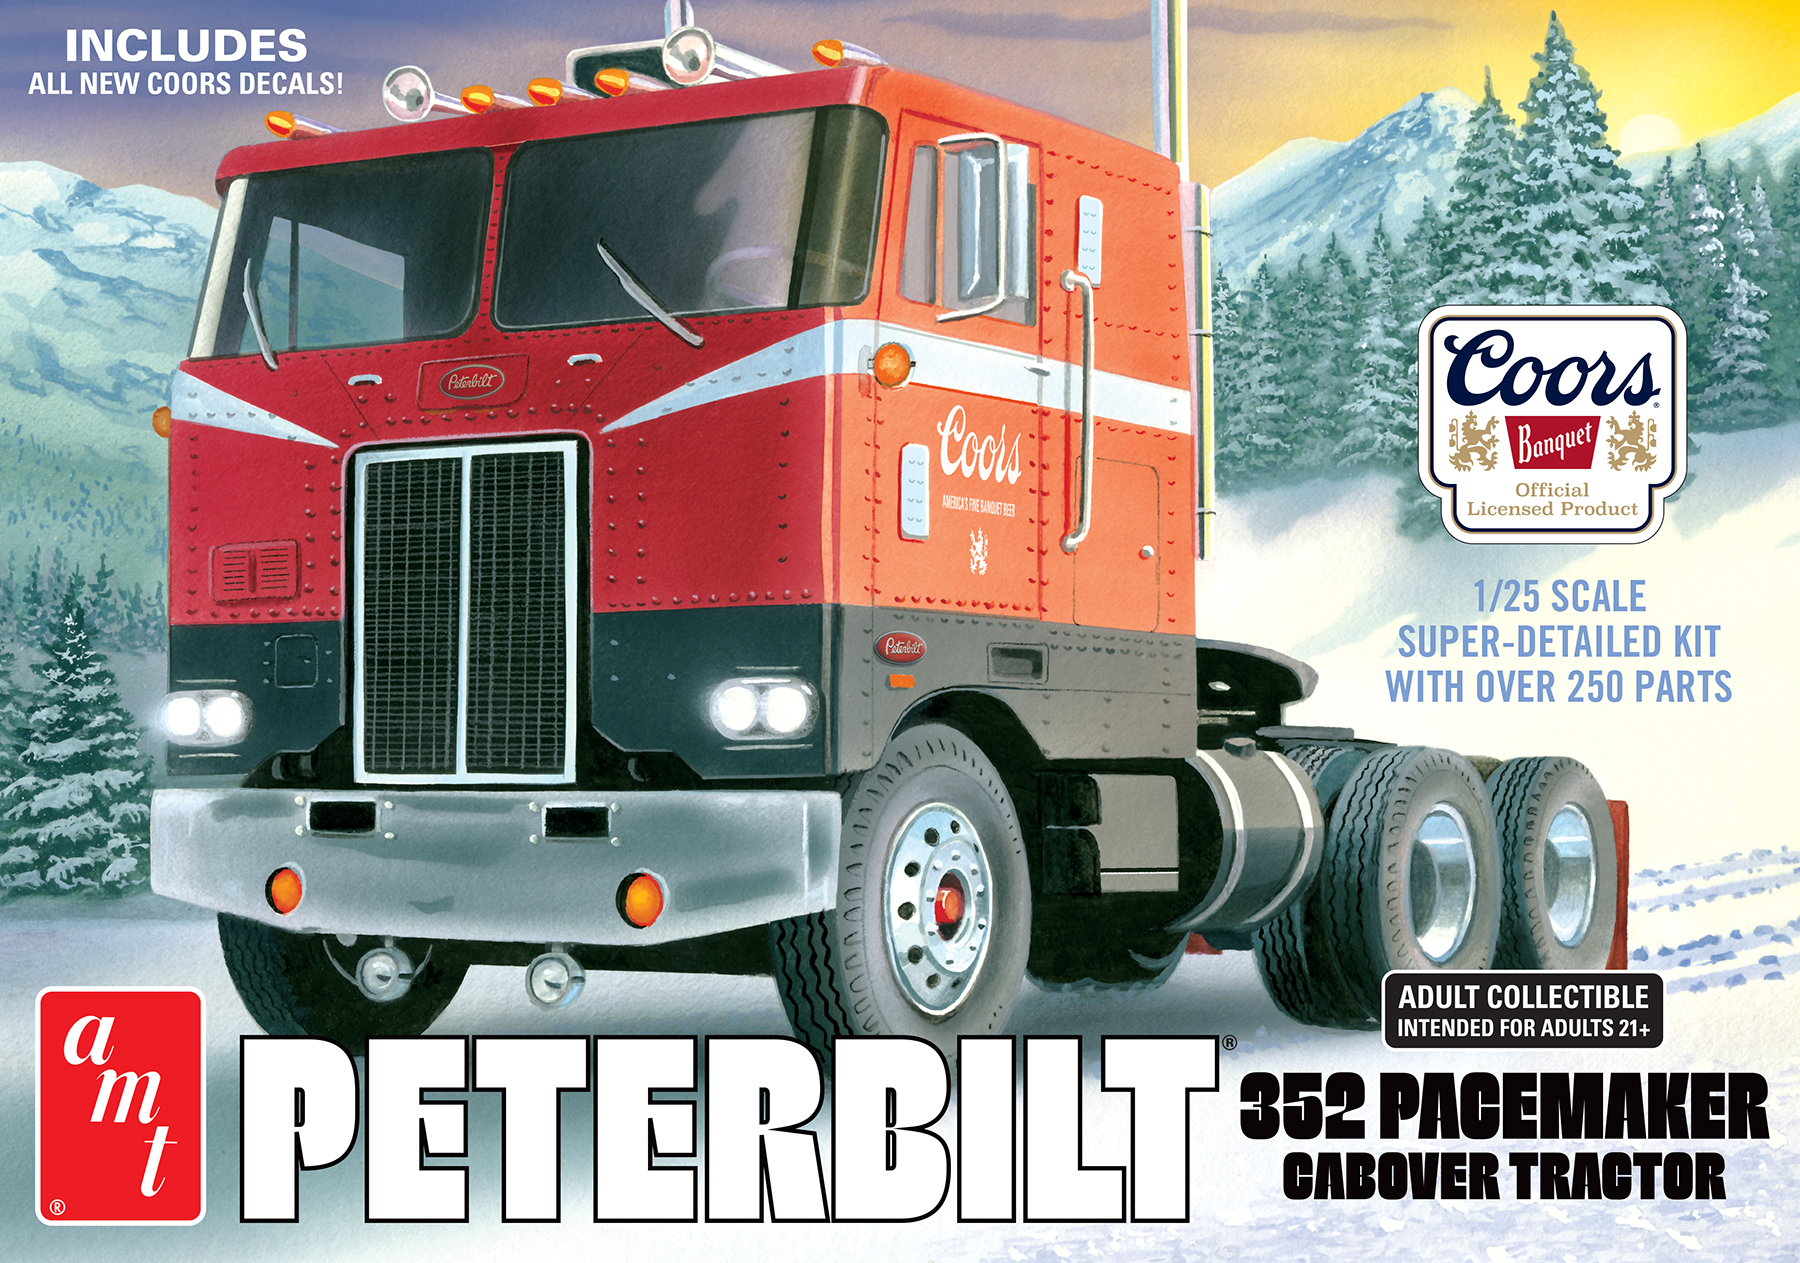 Coors Beer Peterbilt 352 Pacemaker Cabover Tractor Cab